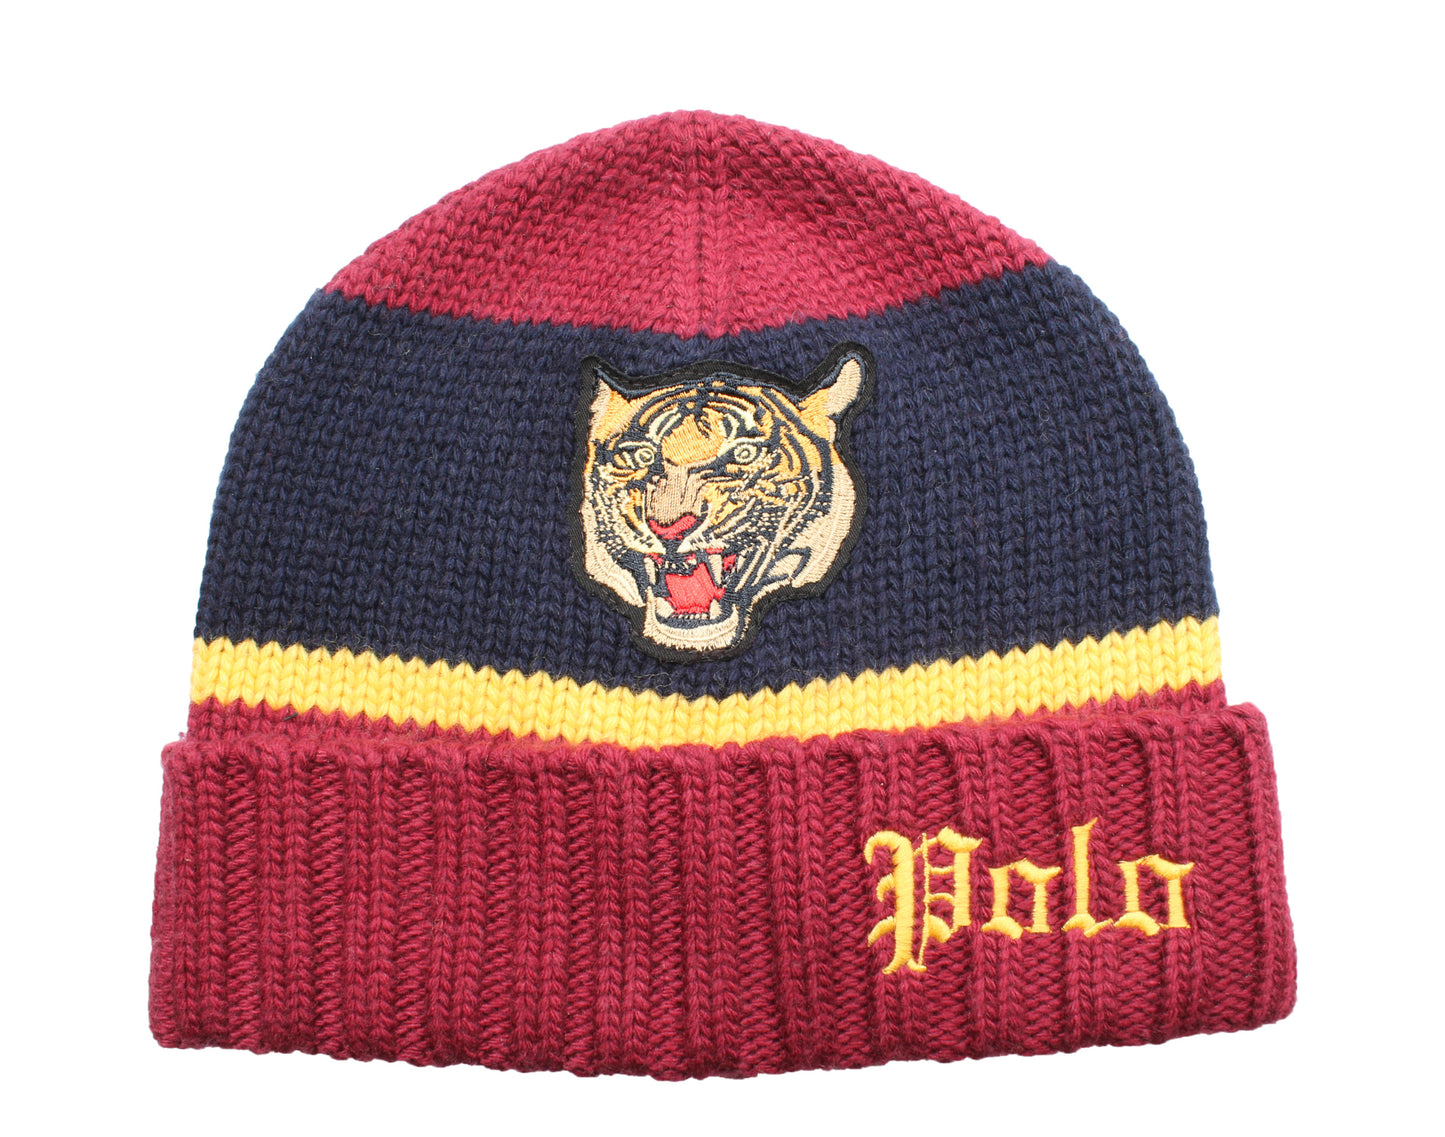 Polo Ralph Lauren Colorblocked Rugby Stripe Tiger Knit Cuffed Hat